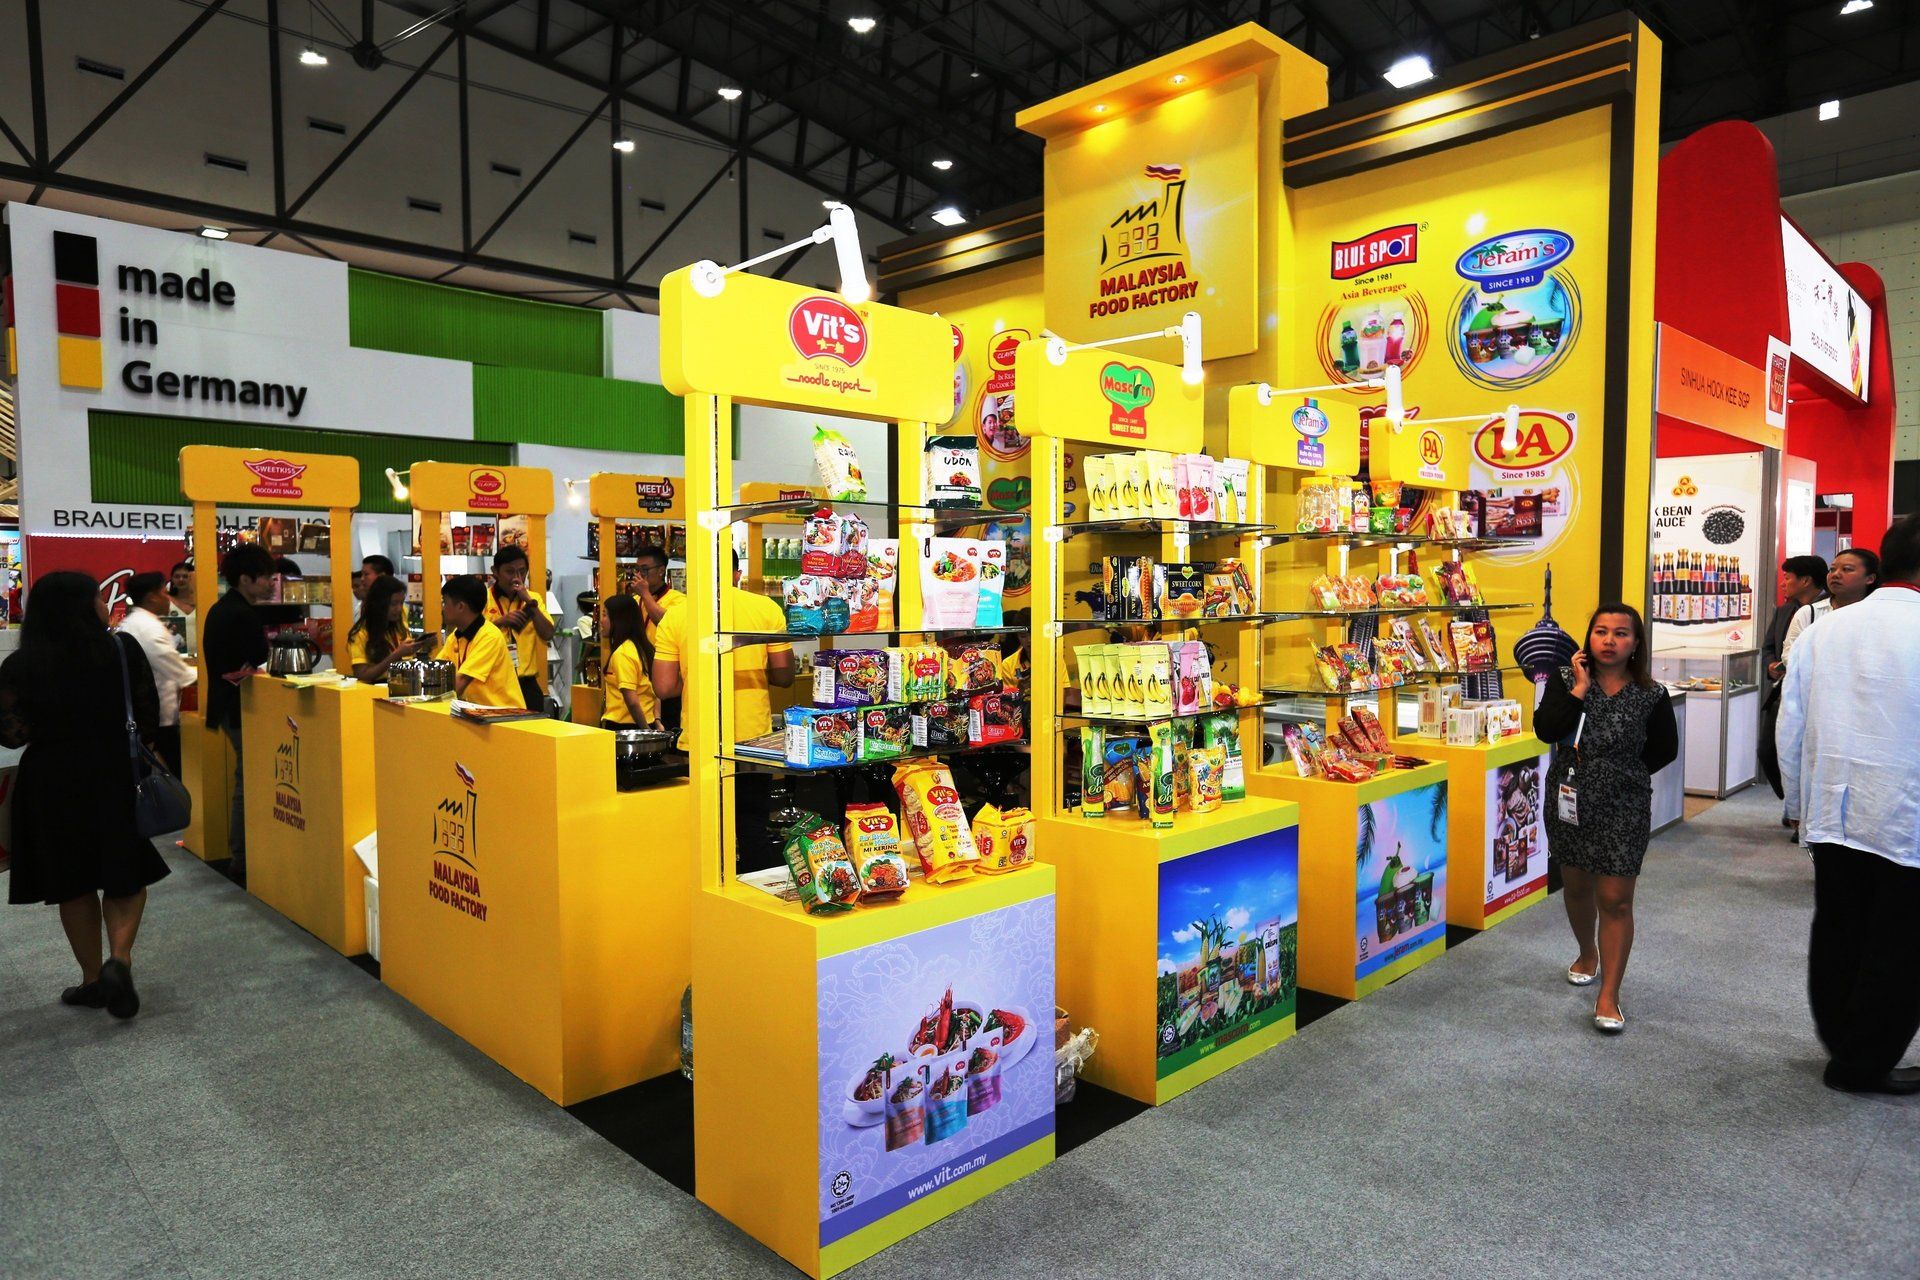 Malaysia Food Factory @ Thaifex 2017. Booth designed and built by Essential Global Fairs.